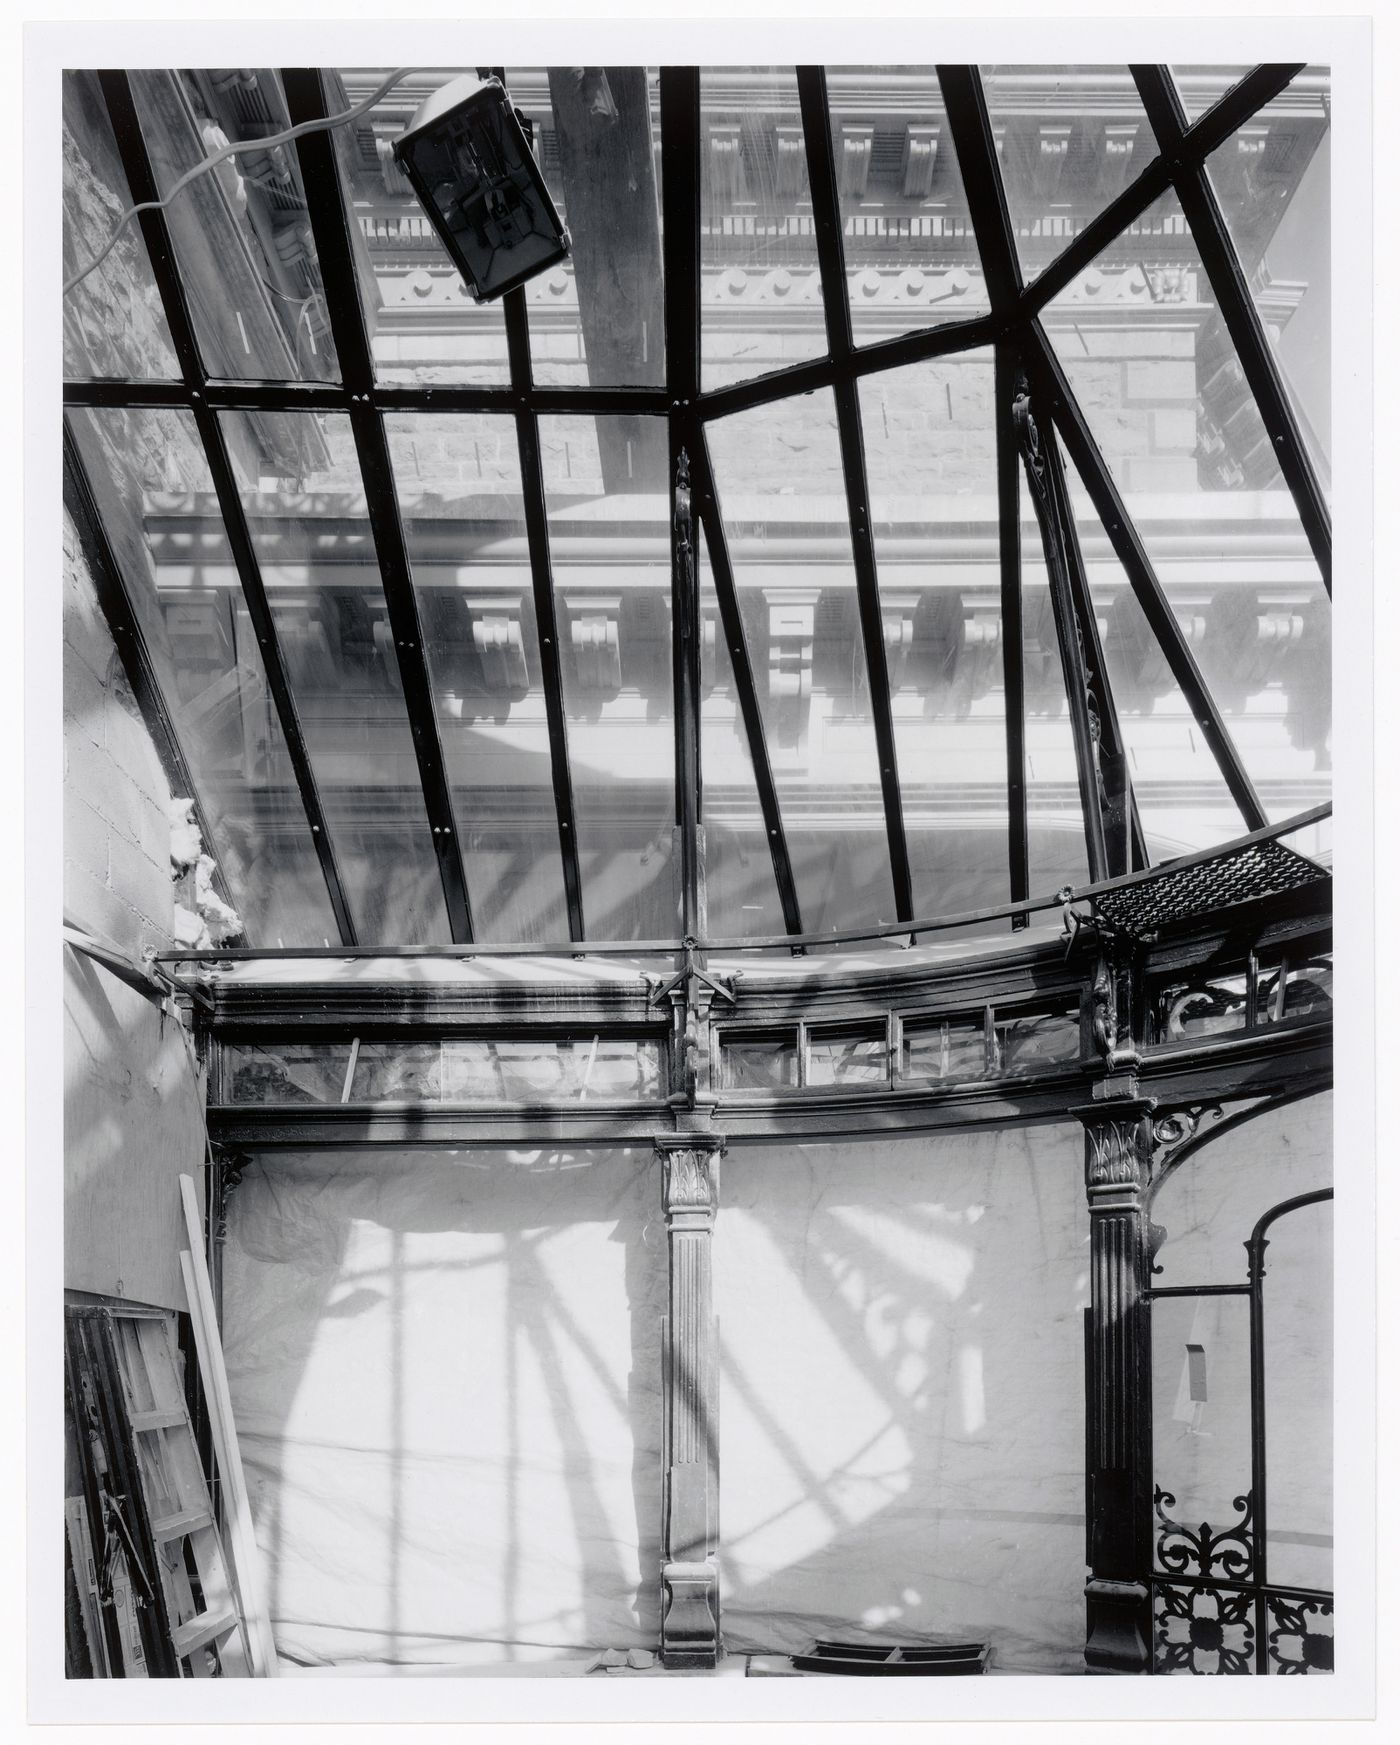 Interior view of the conservatory showing the glazed and ironwork ceiling, Shaughnessy House under renovation, Montréal, Québec